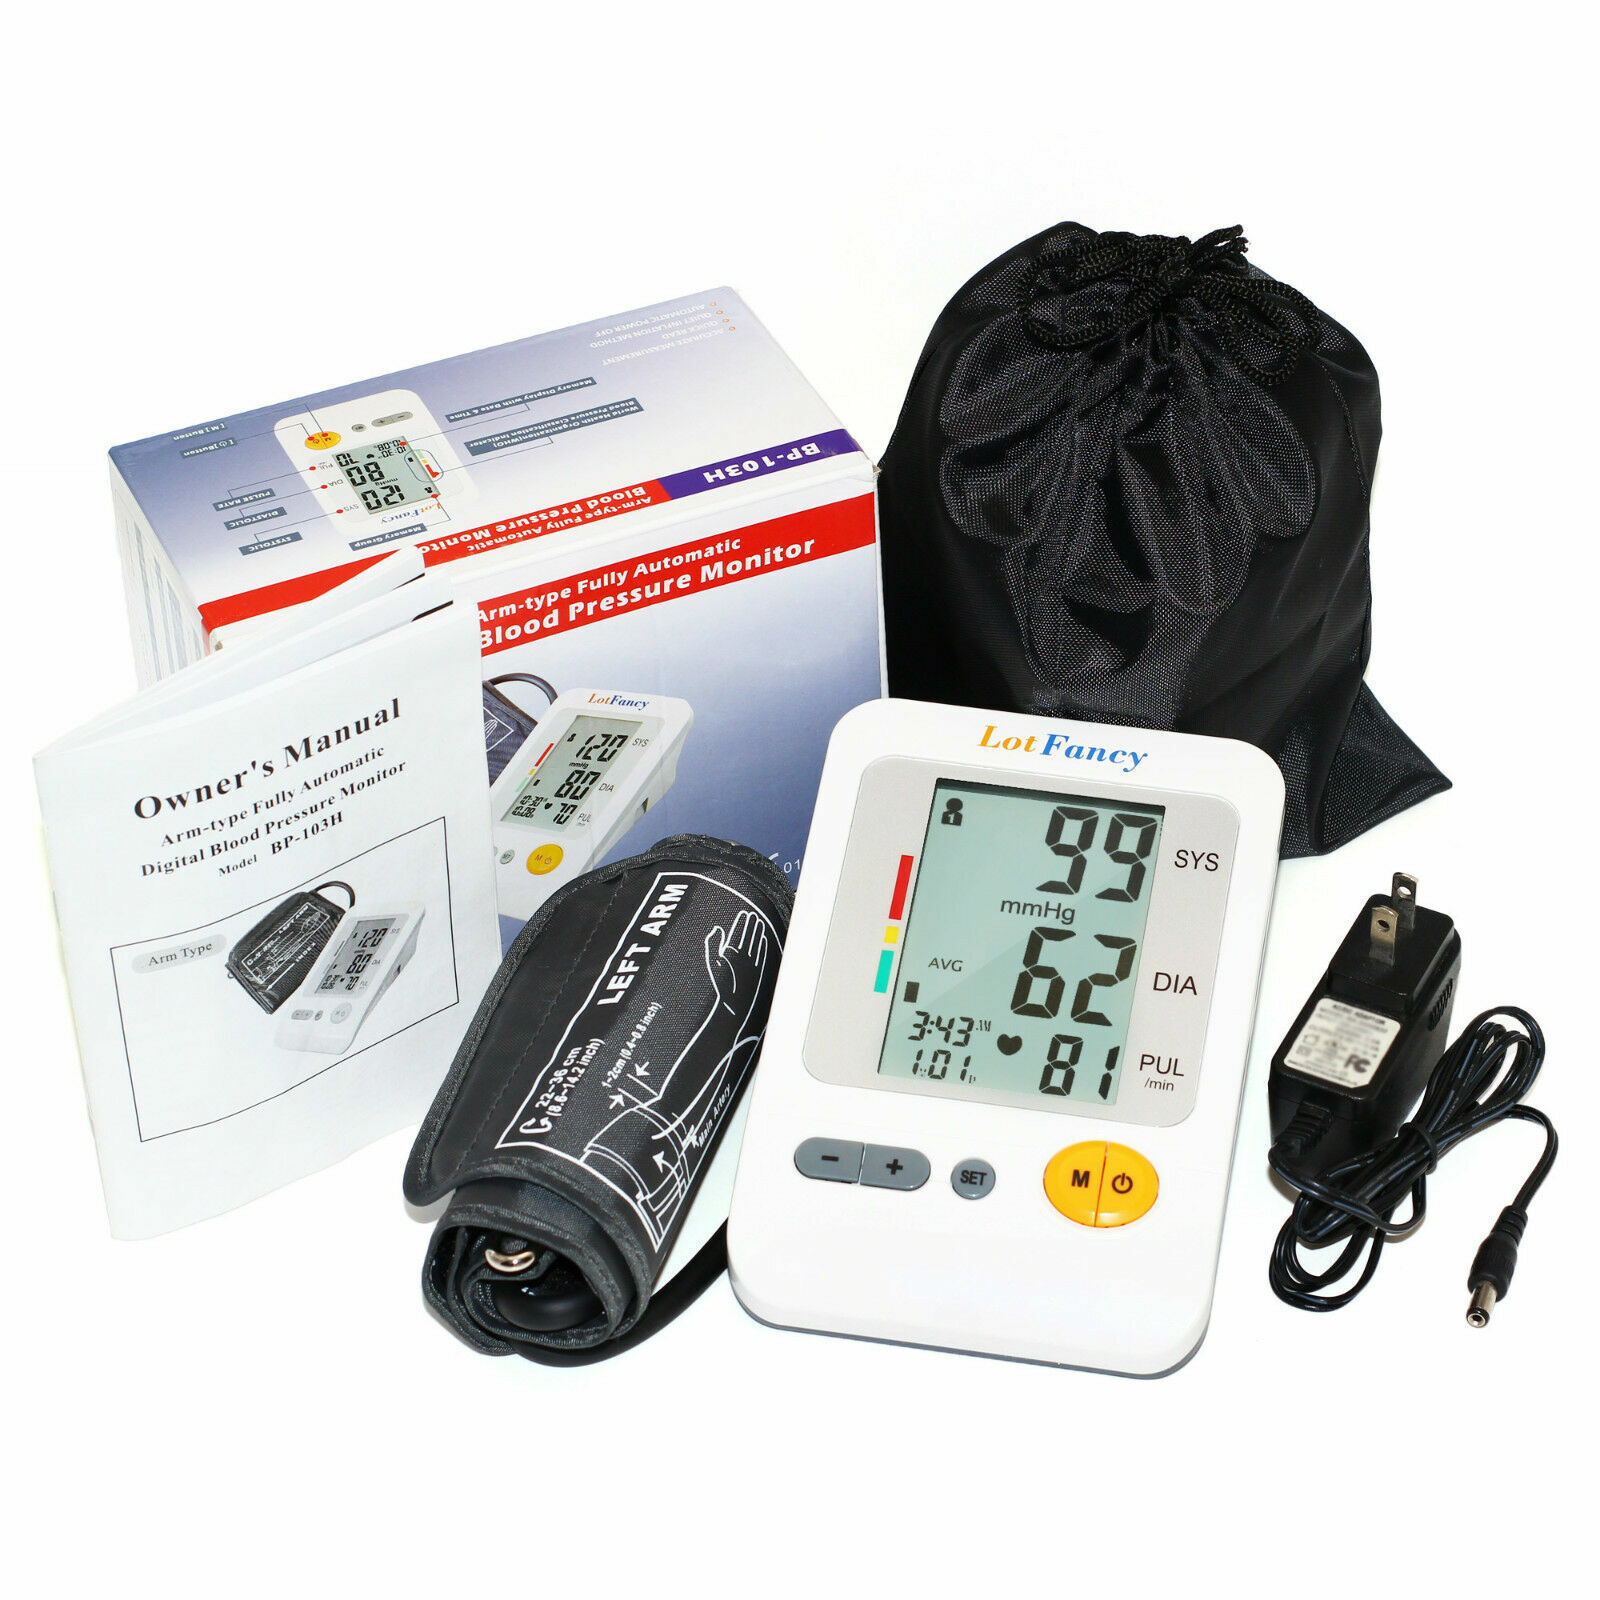 Automatic Digital Arm Blood Pressure Monitor Heart Rate Machine Meter BP Cuff LotFancy Does Not Apply - фотография #6